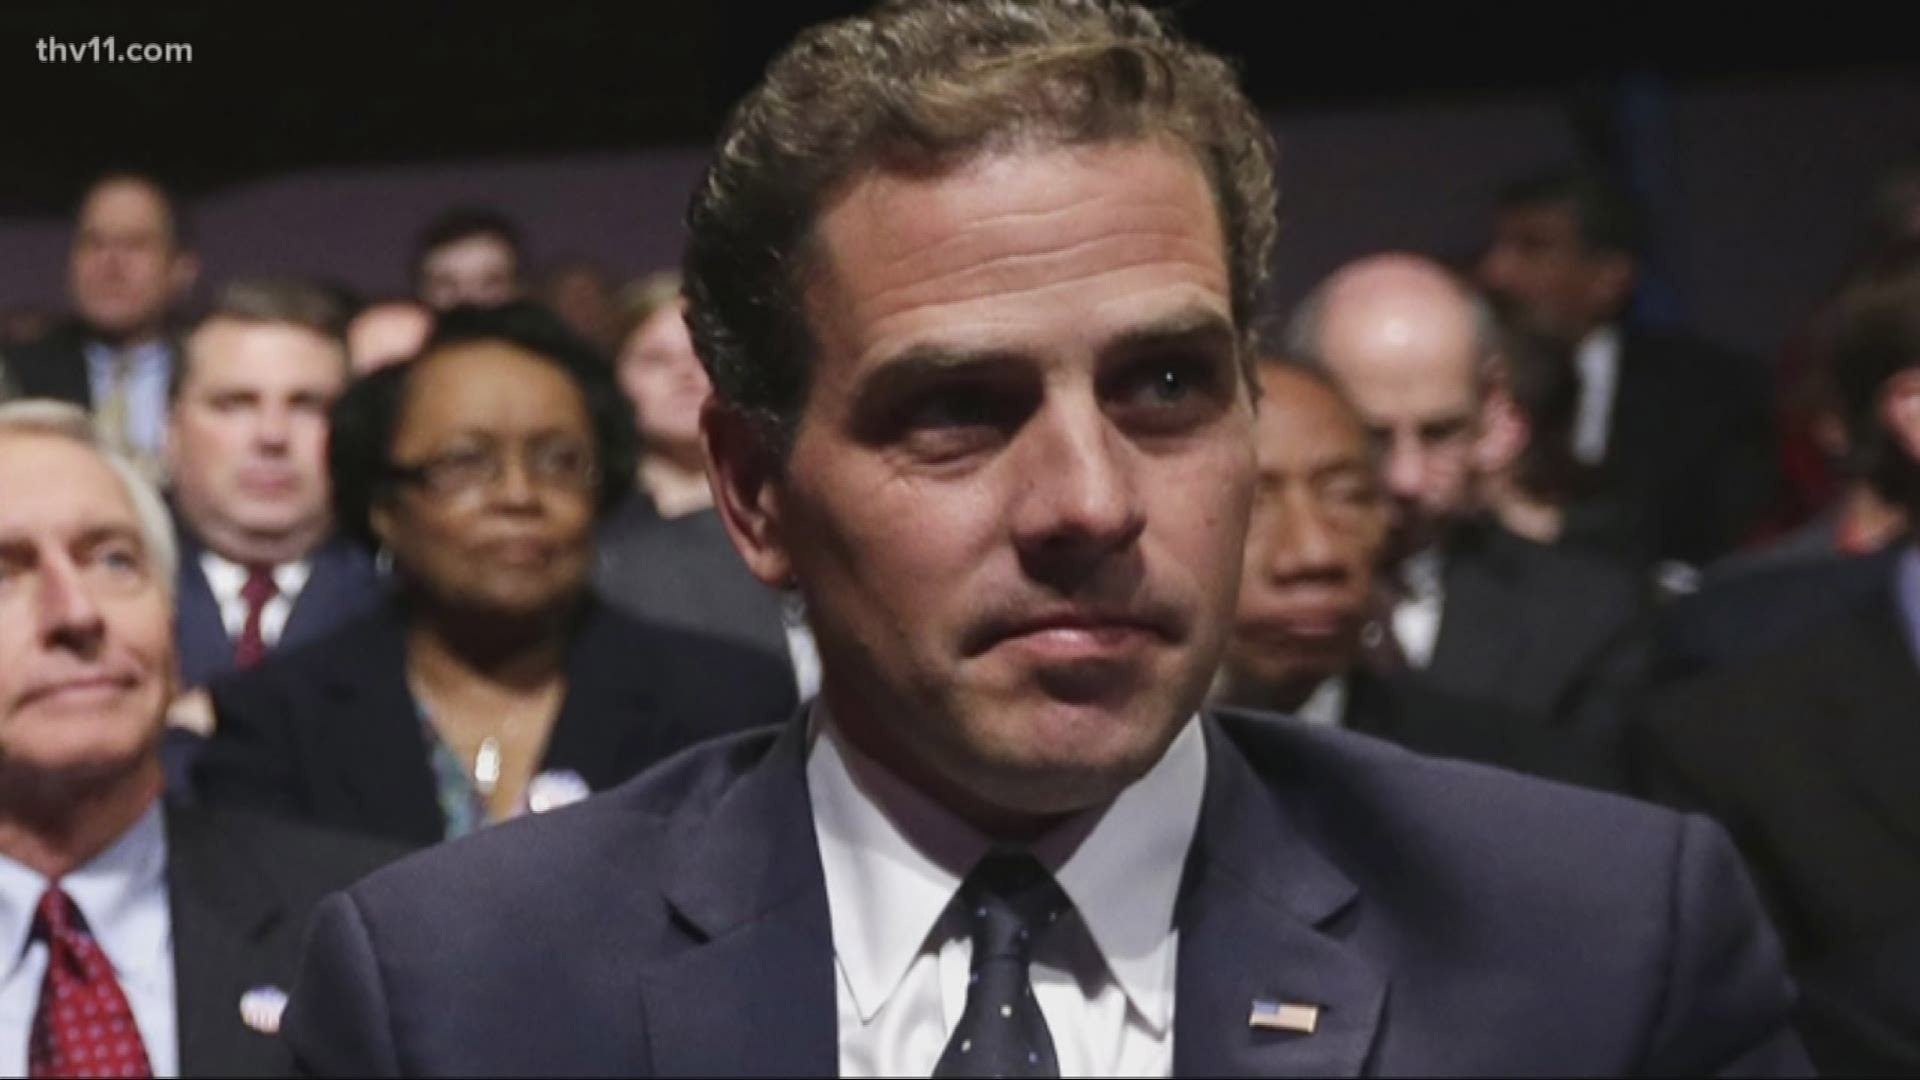 An Arkansas woman has won a case against Democratic Presidential Candidate Joe Biden's son, Hunter Biden. A DNA test found he's the father of her baby.